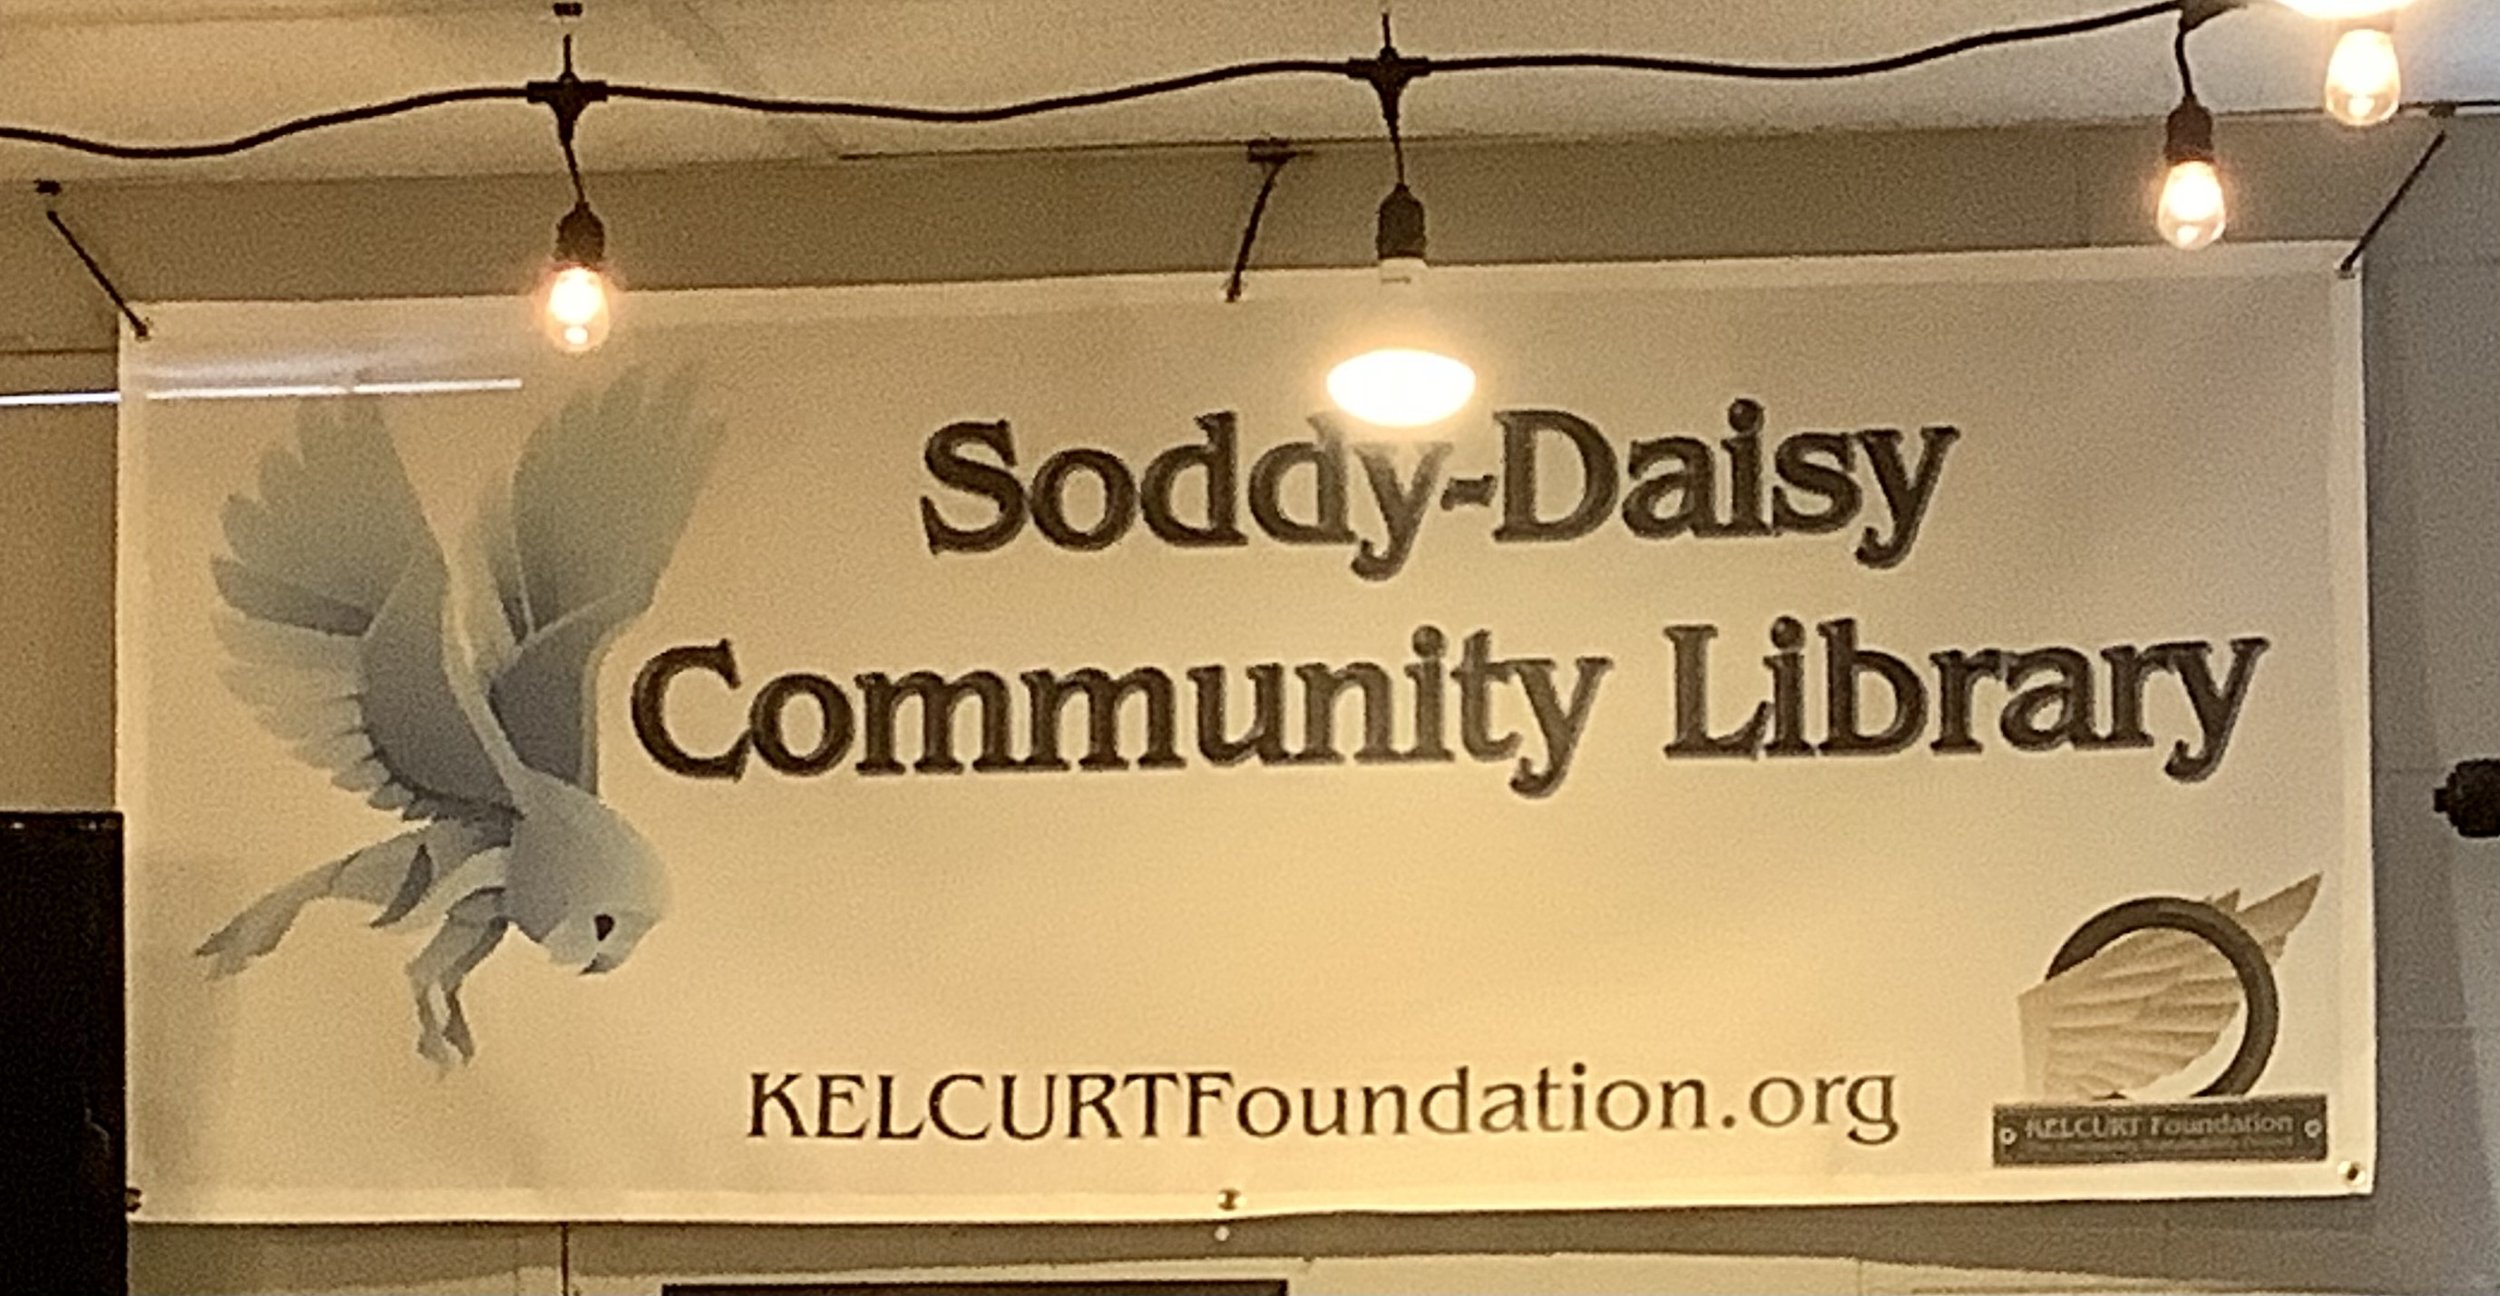  Book launch at Soddy-Daisy Community Library 